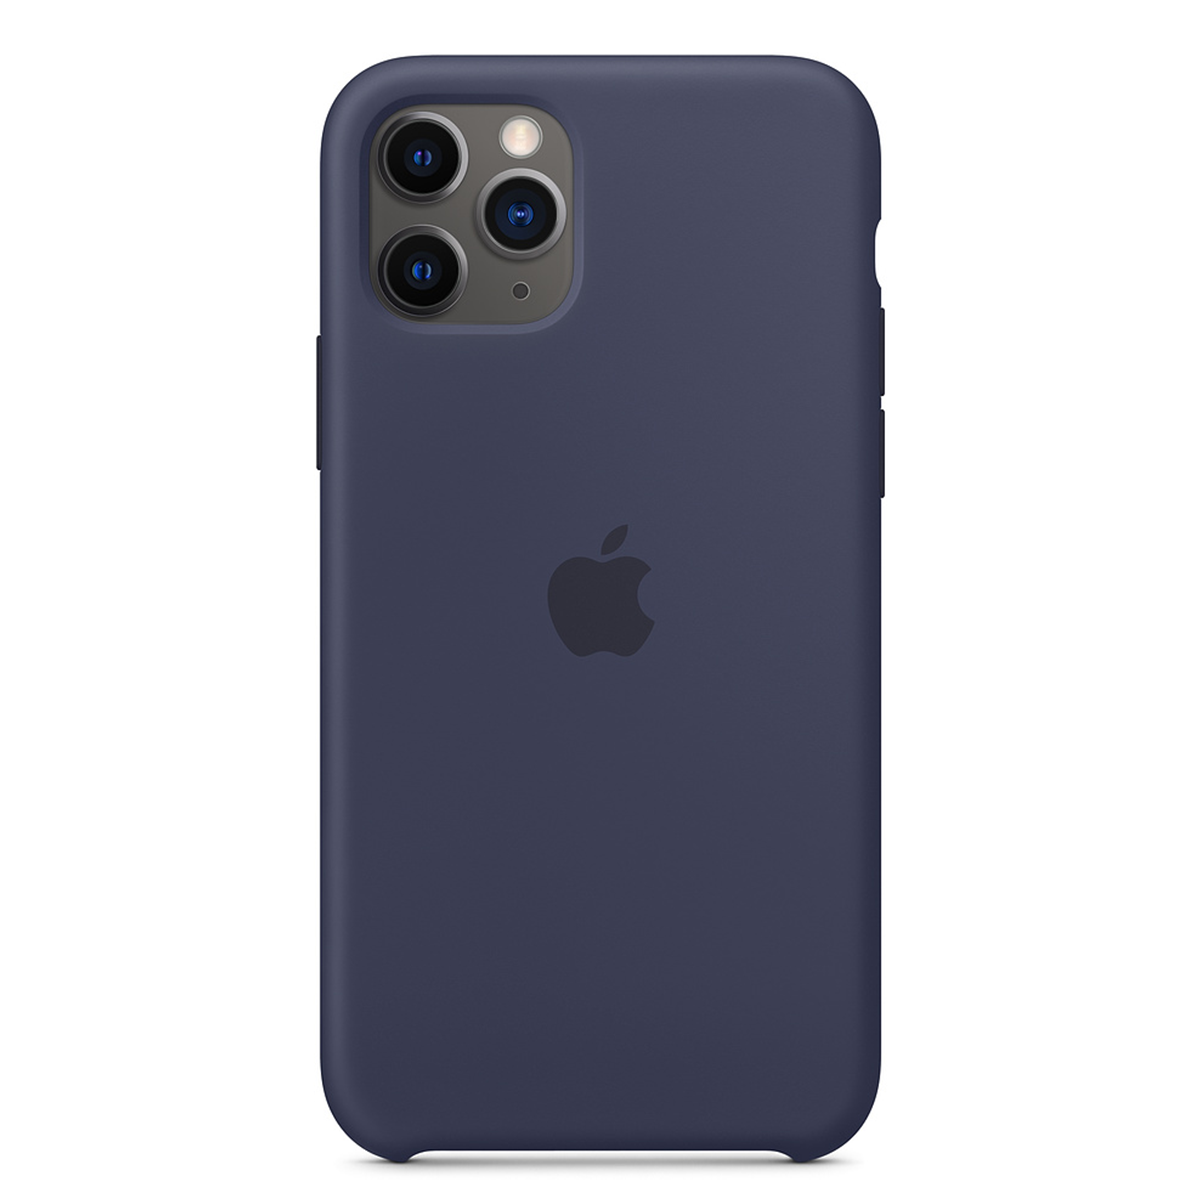 iPhone 11 Pro Silicone Case Midnight Blue